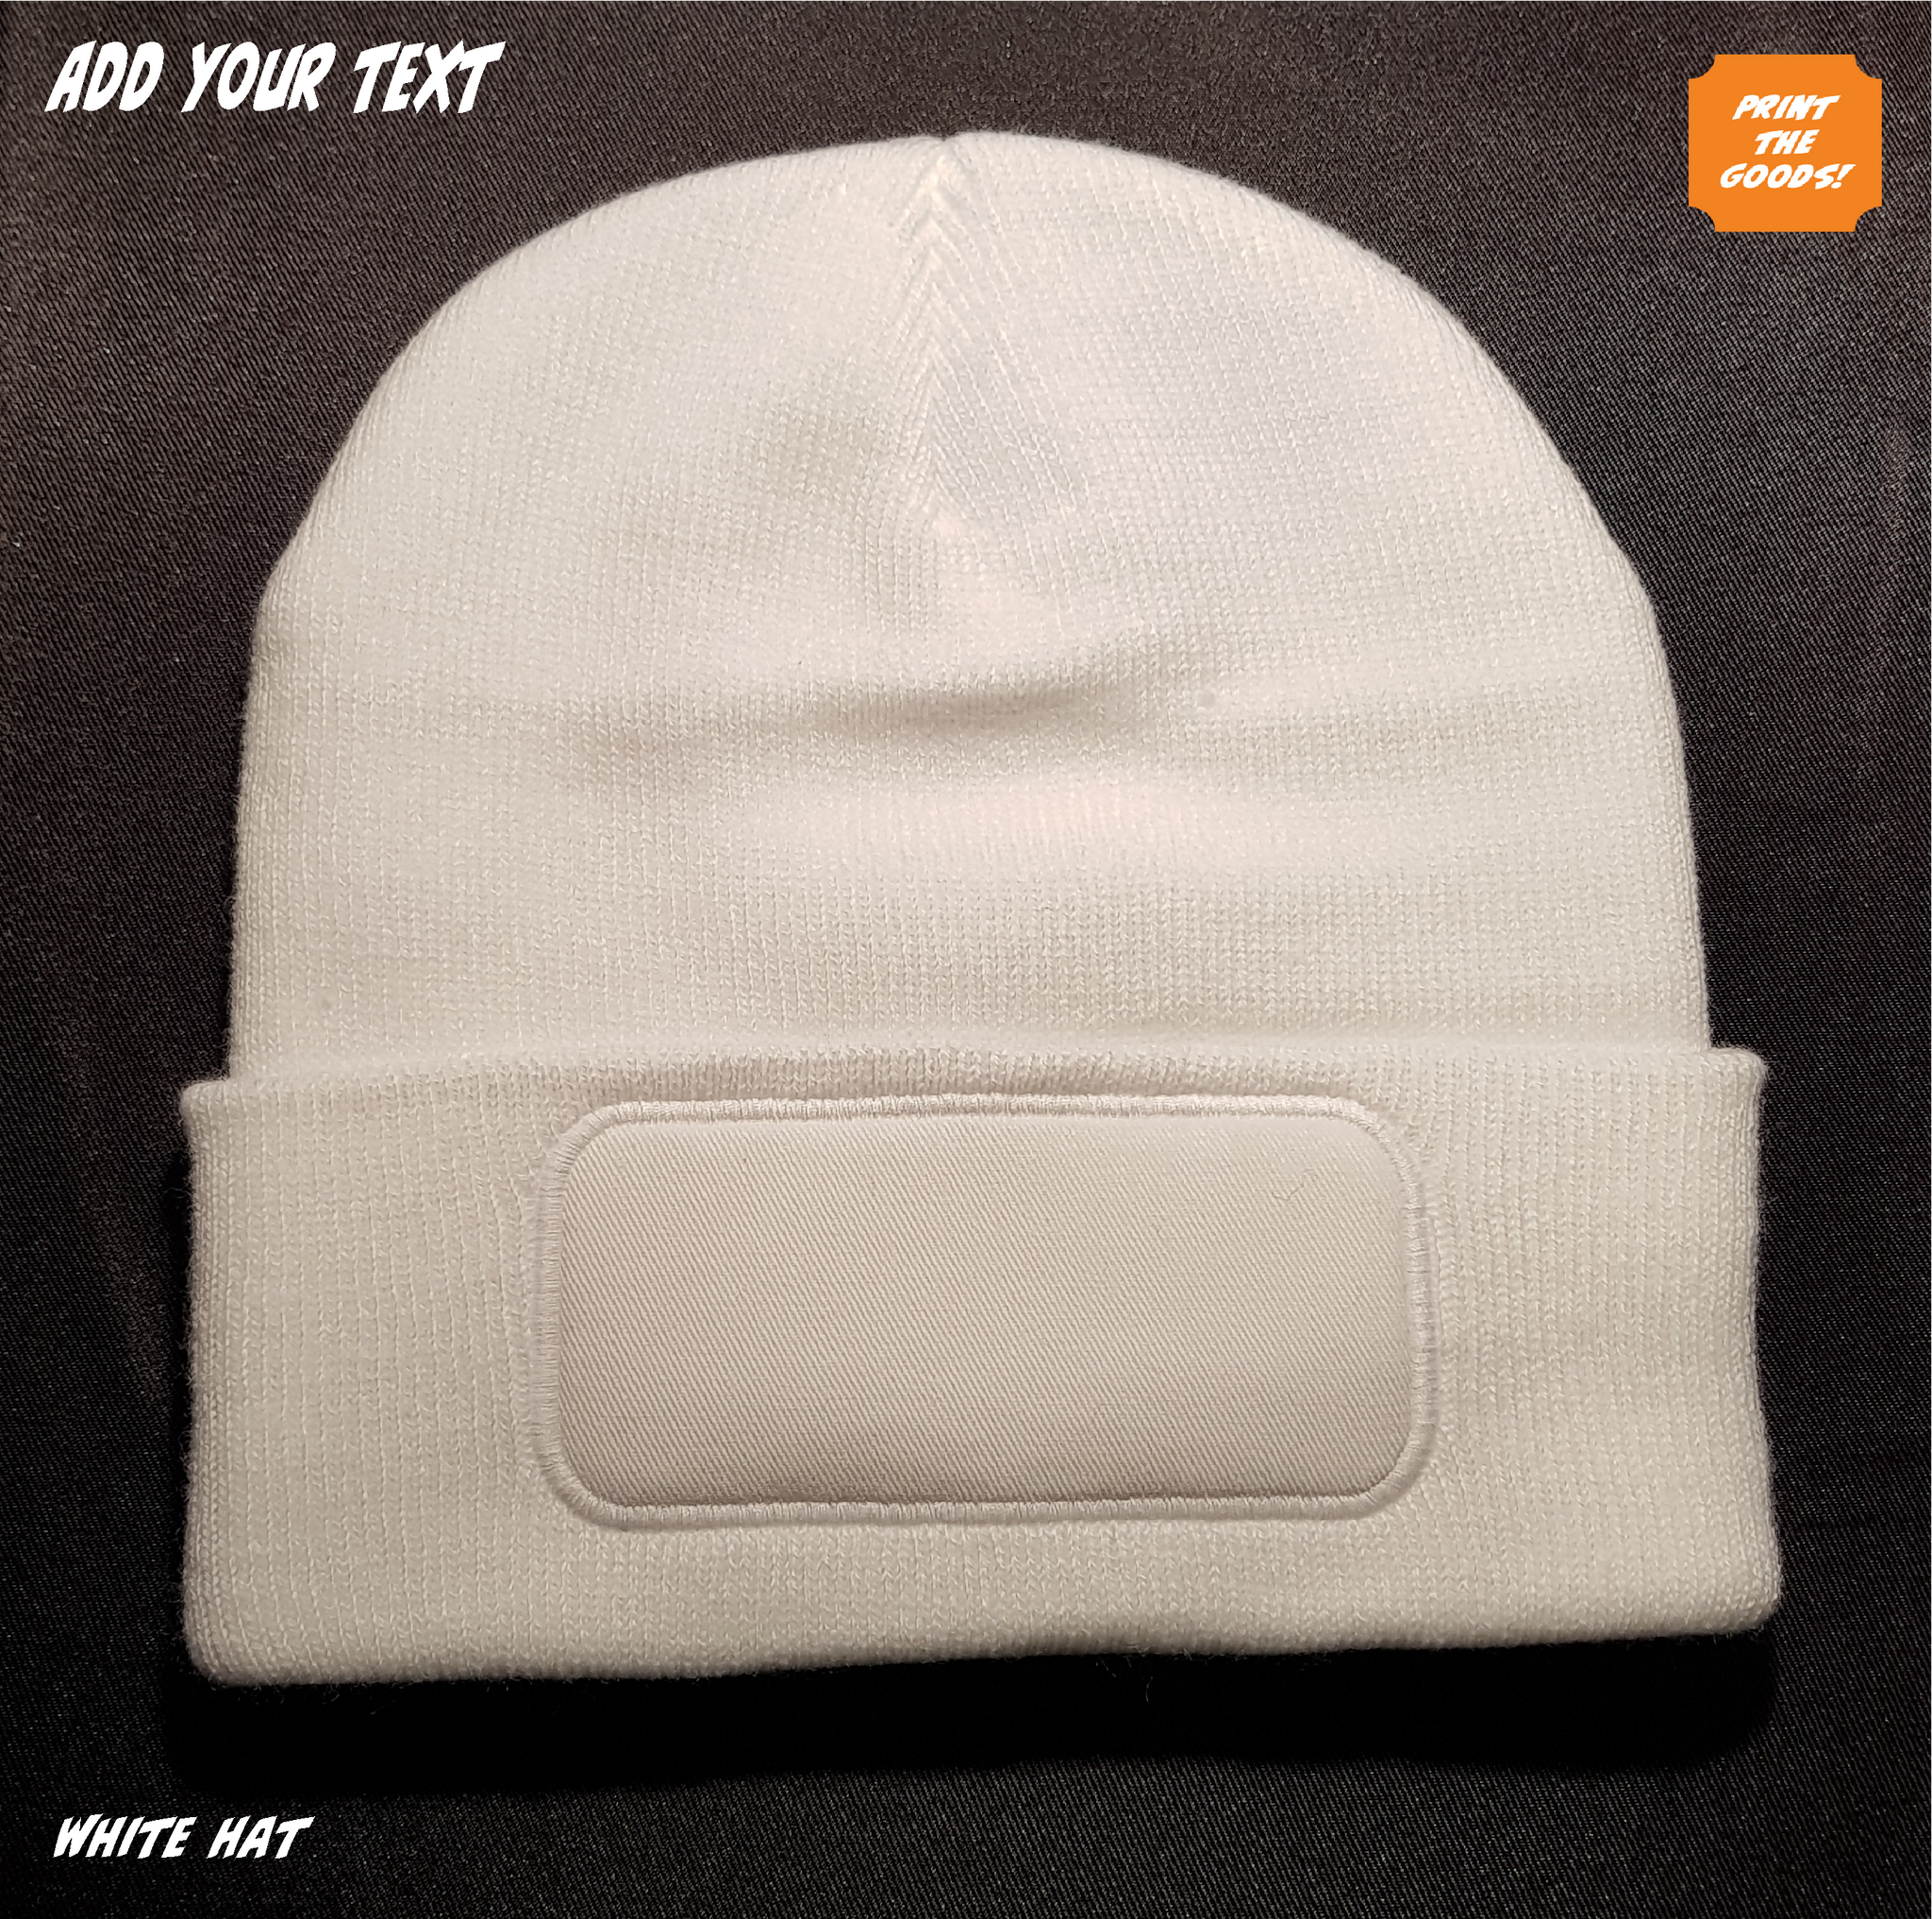 Customise this white winter hat